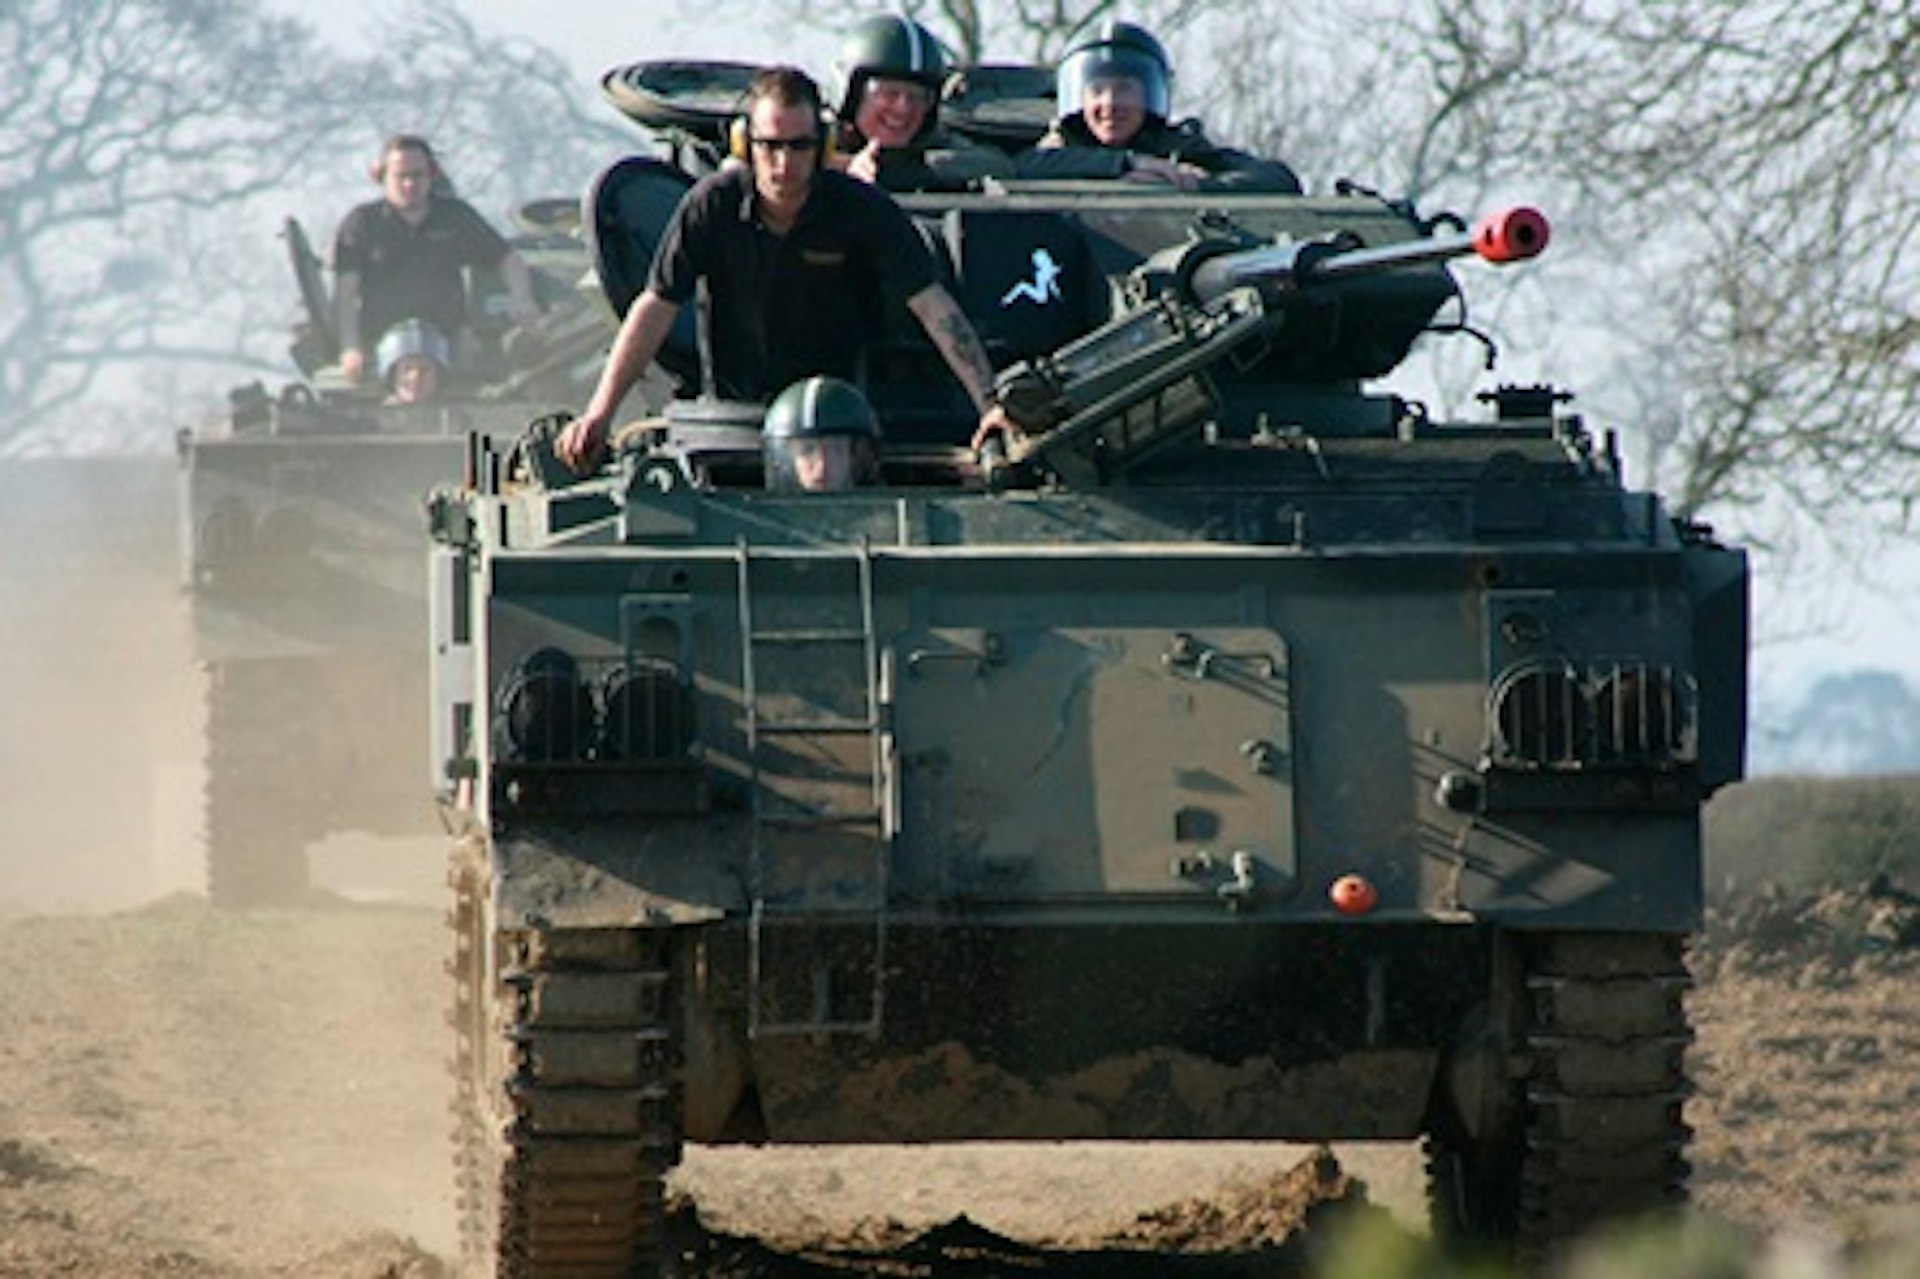 Adult and Child Tank Driving Experience 3